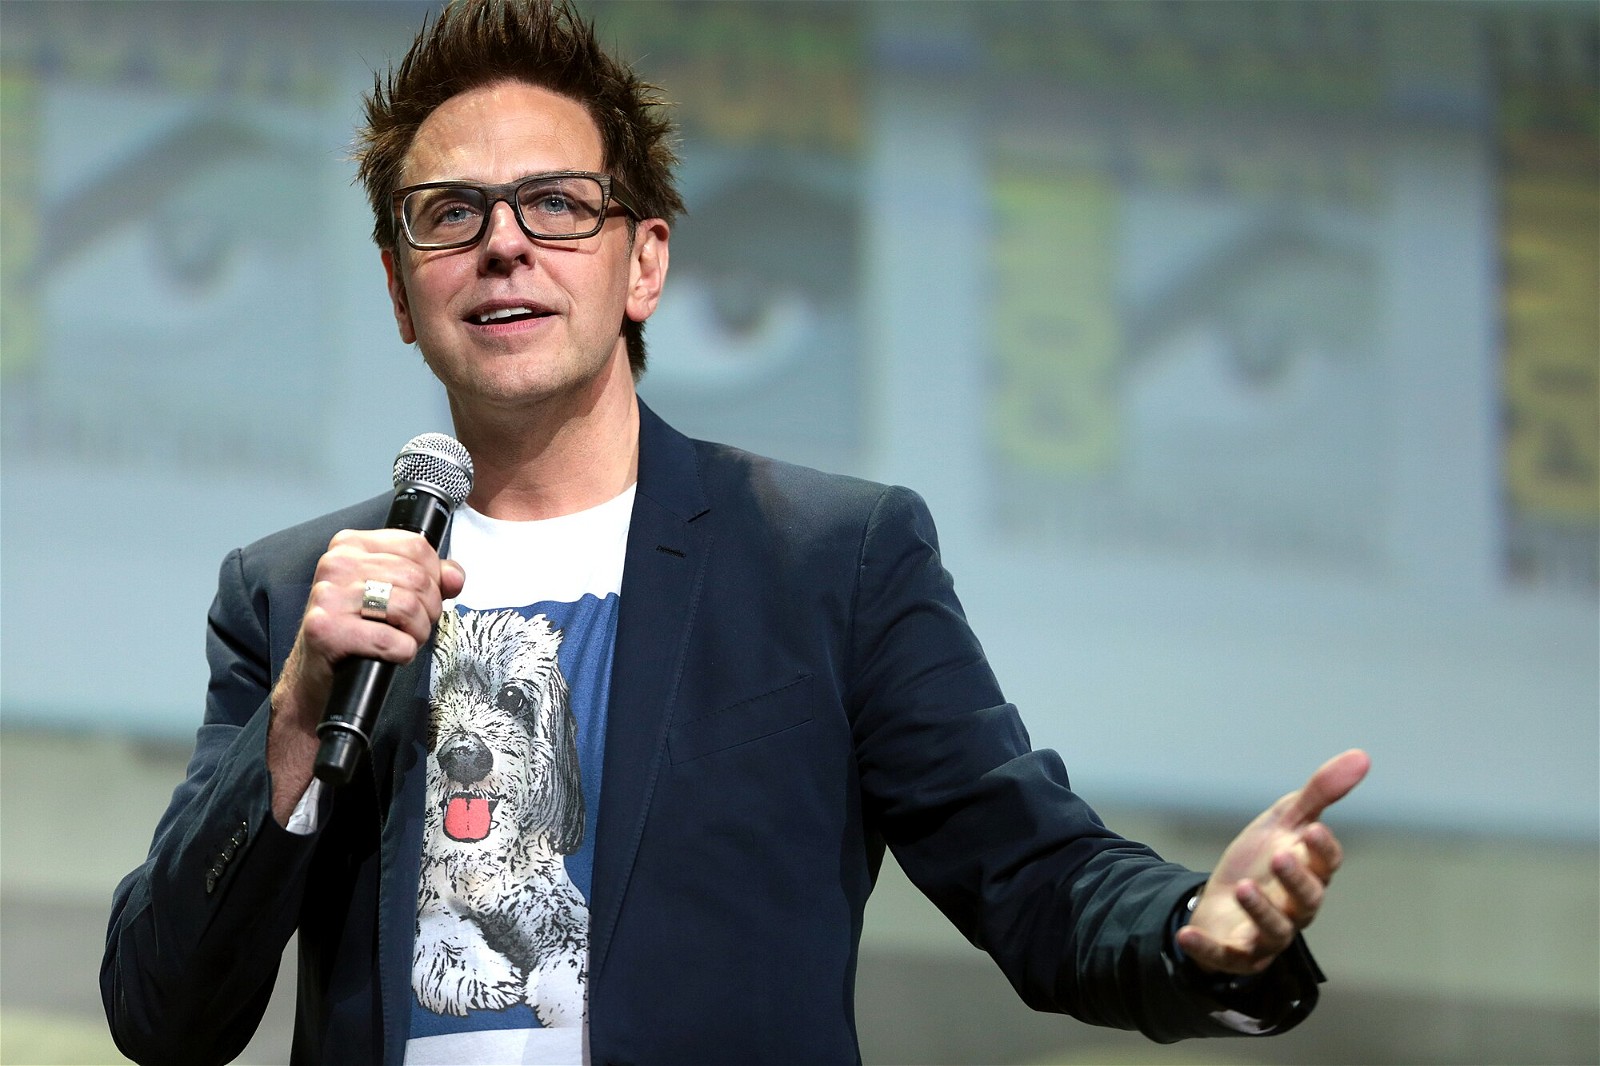 James Gunn confirmed the show is in post-production.